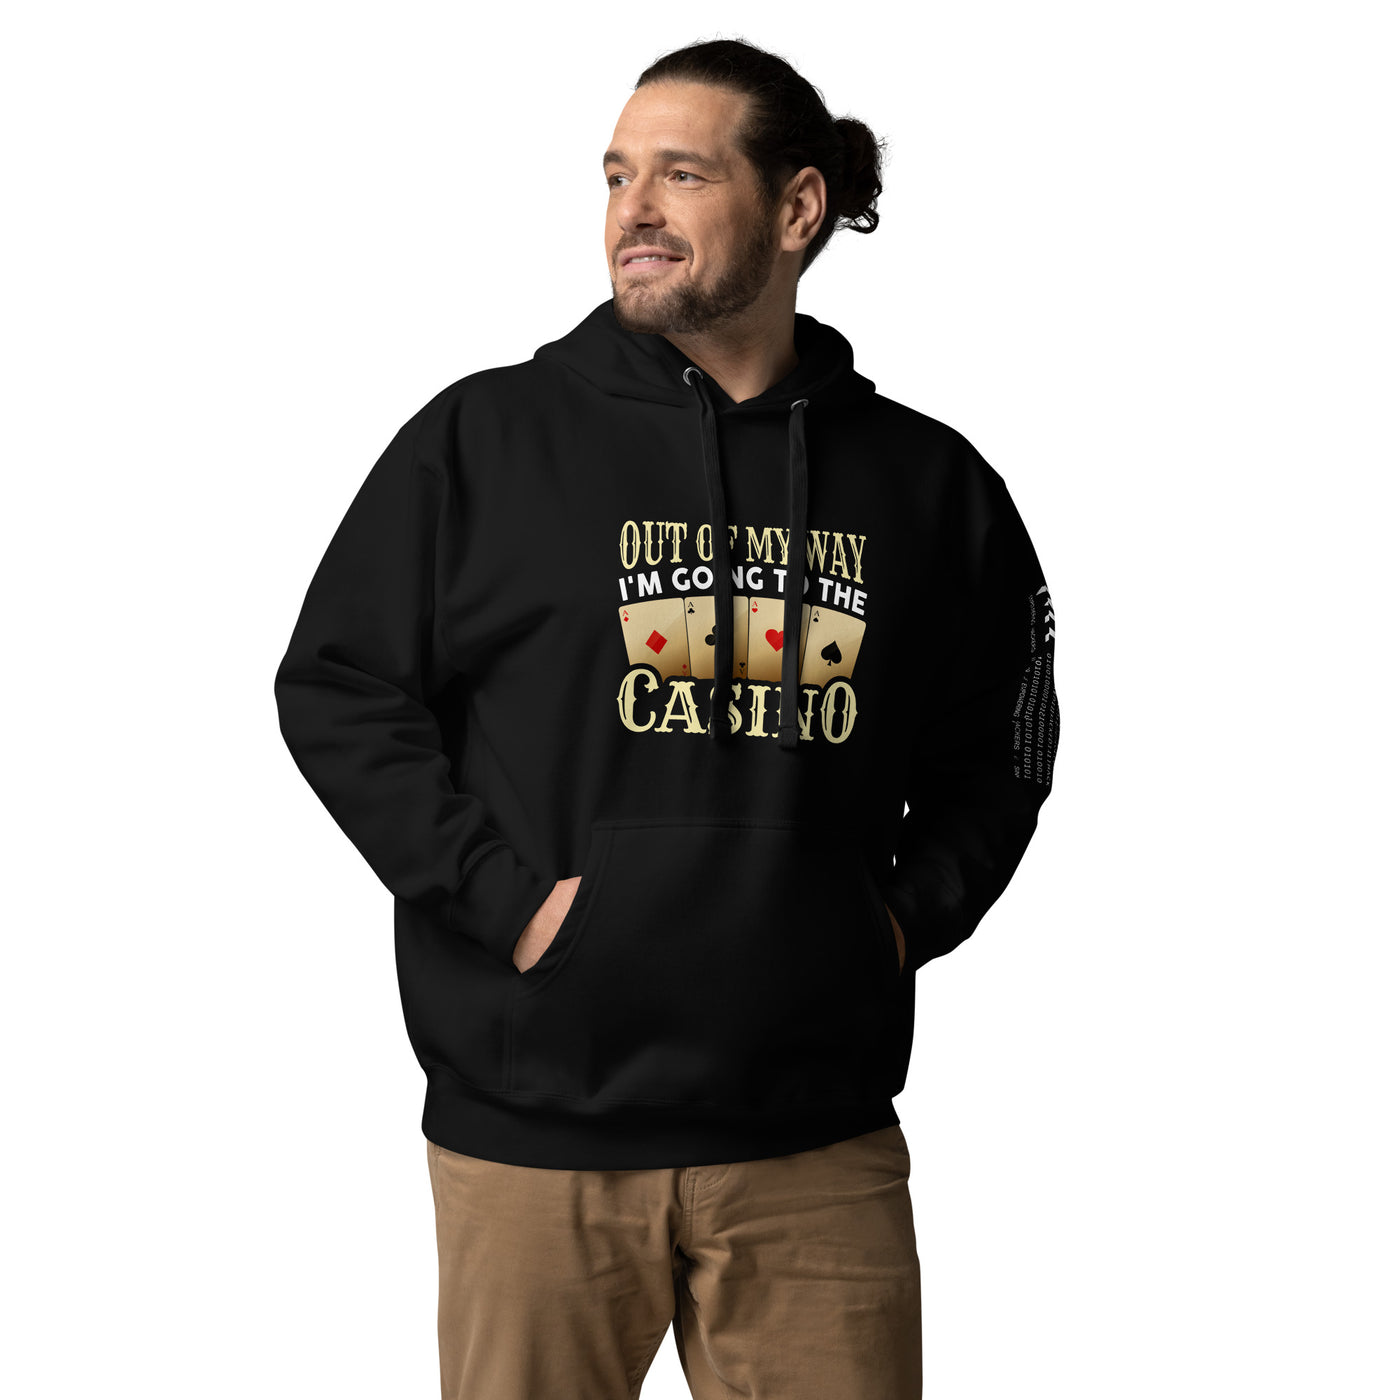 Out of My way; I am Going to the Casino - Unisex Hoodie